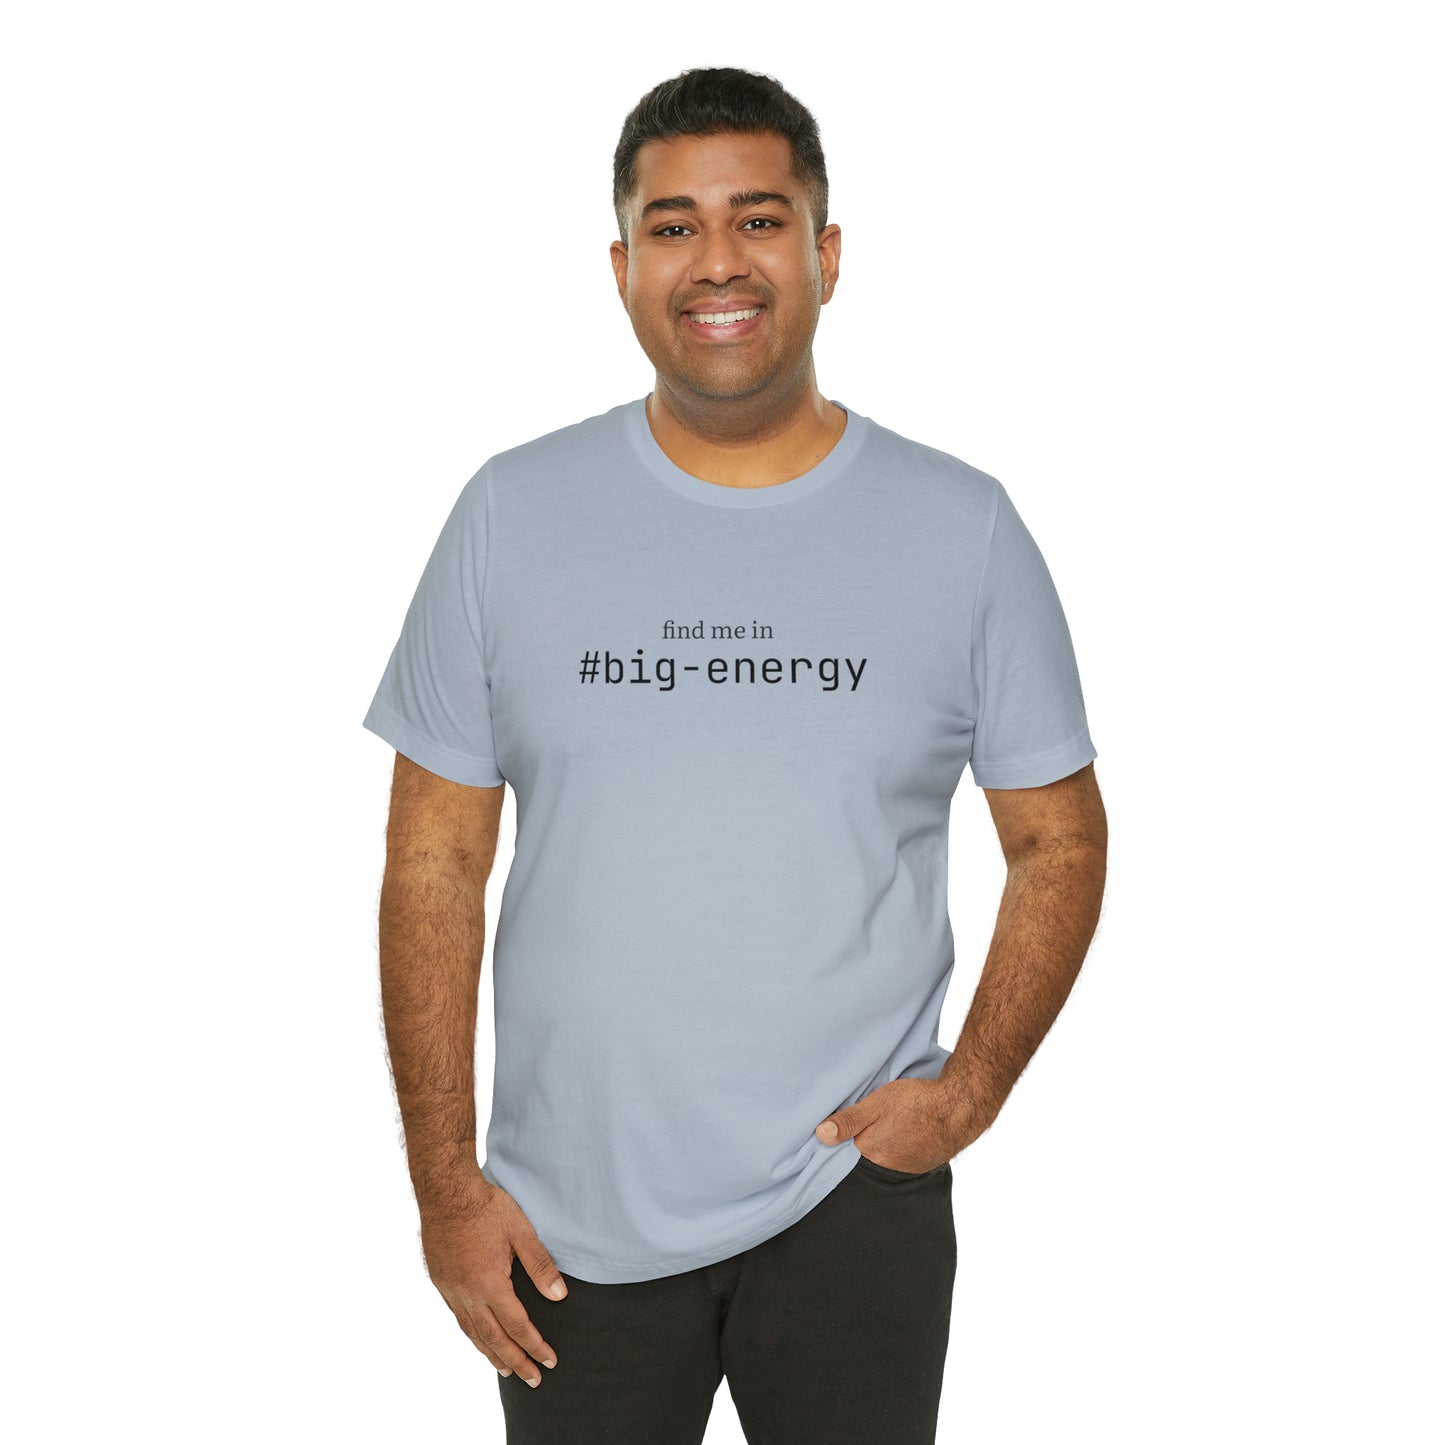 Find me in #big-energy T-Shirt